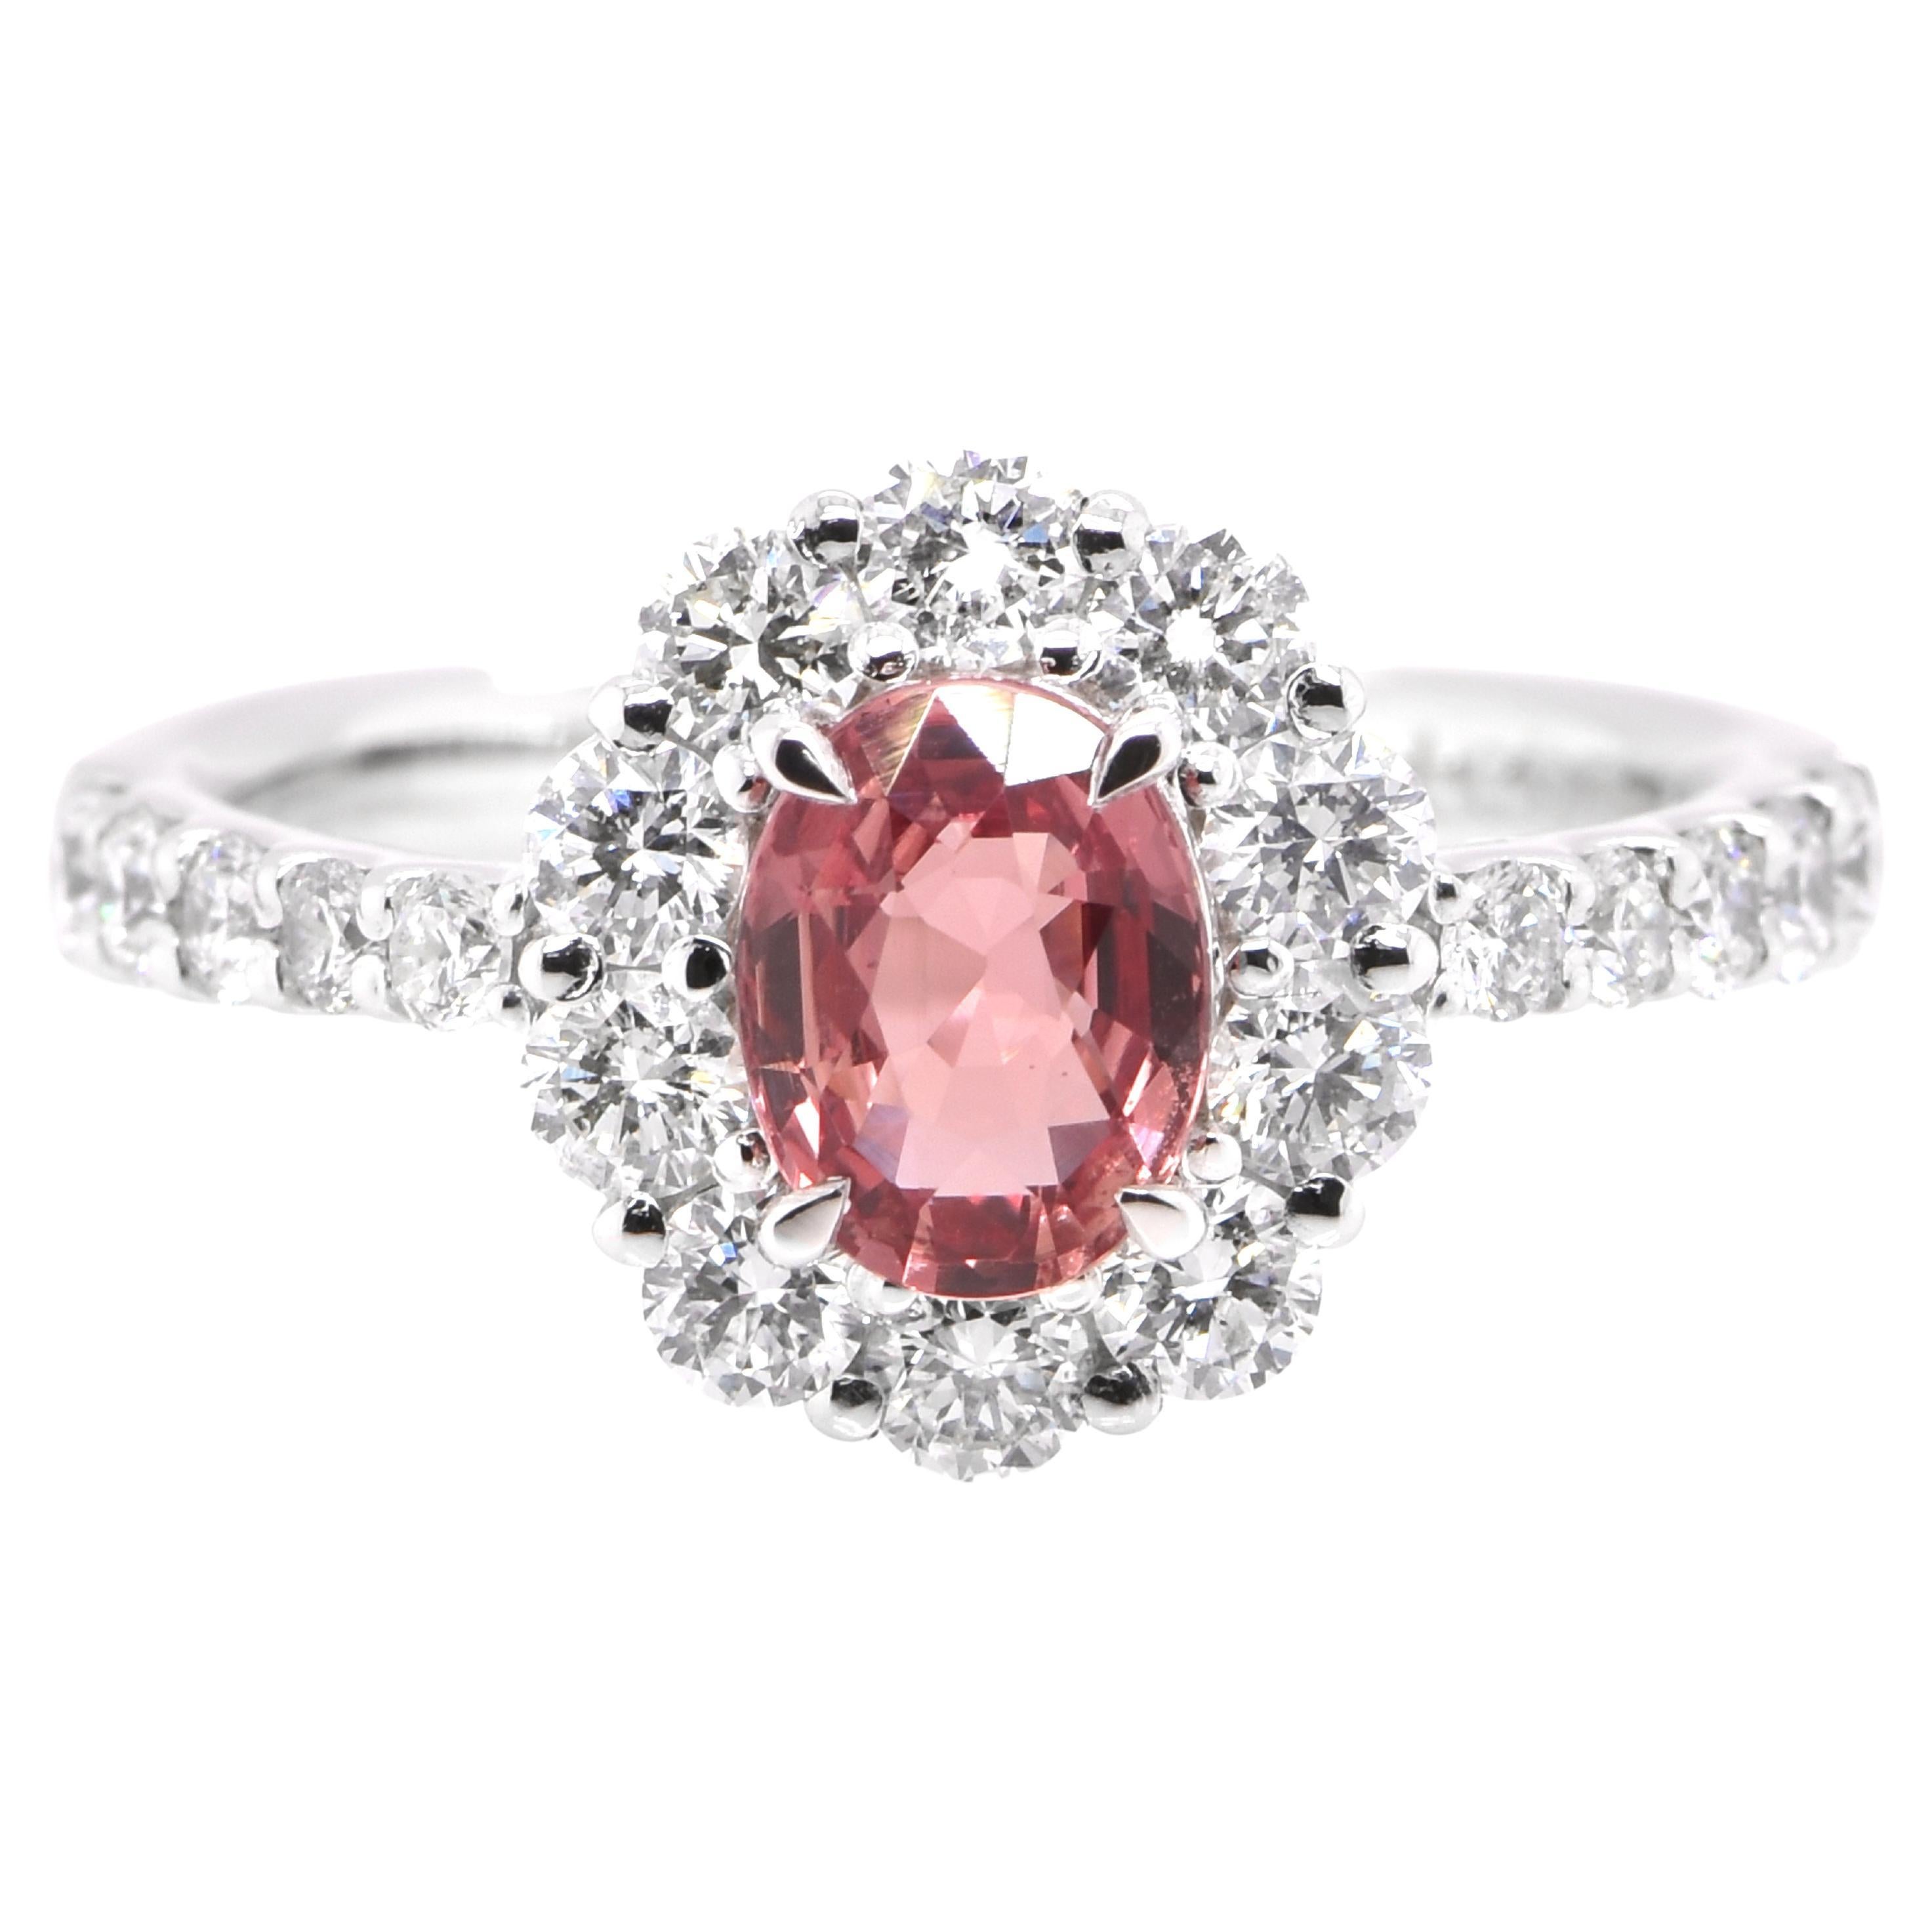 GIA Certified 1.02 Carat, Unheated Padparadscha Sapphire Ring set in Platinum